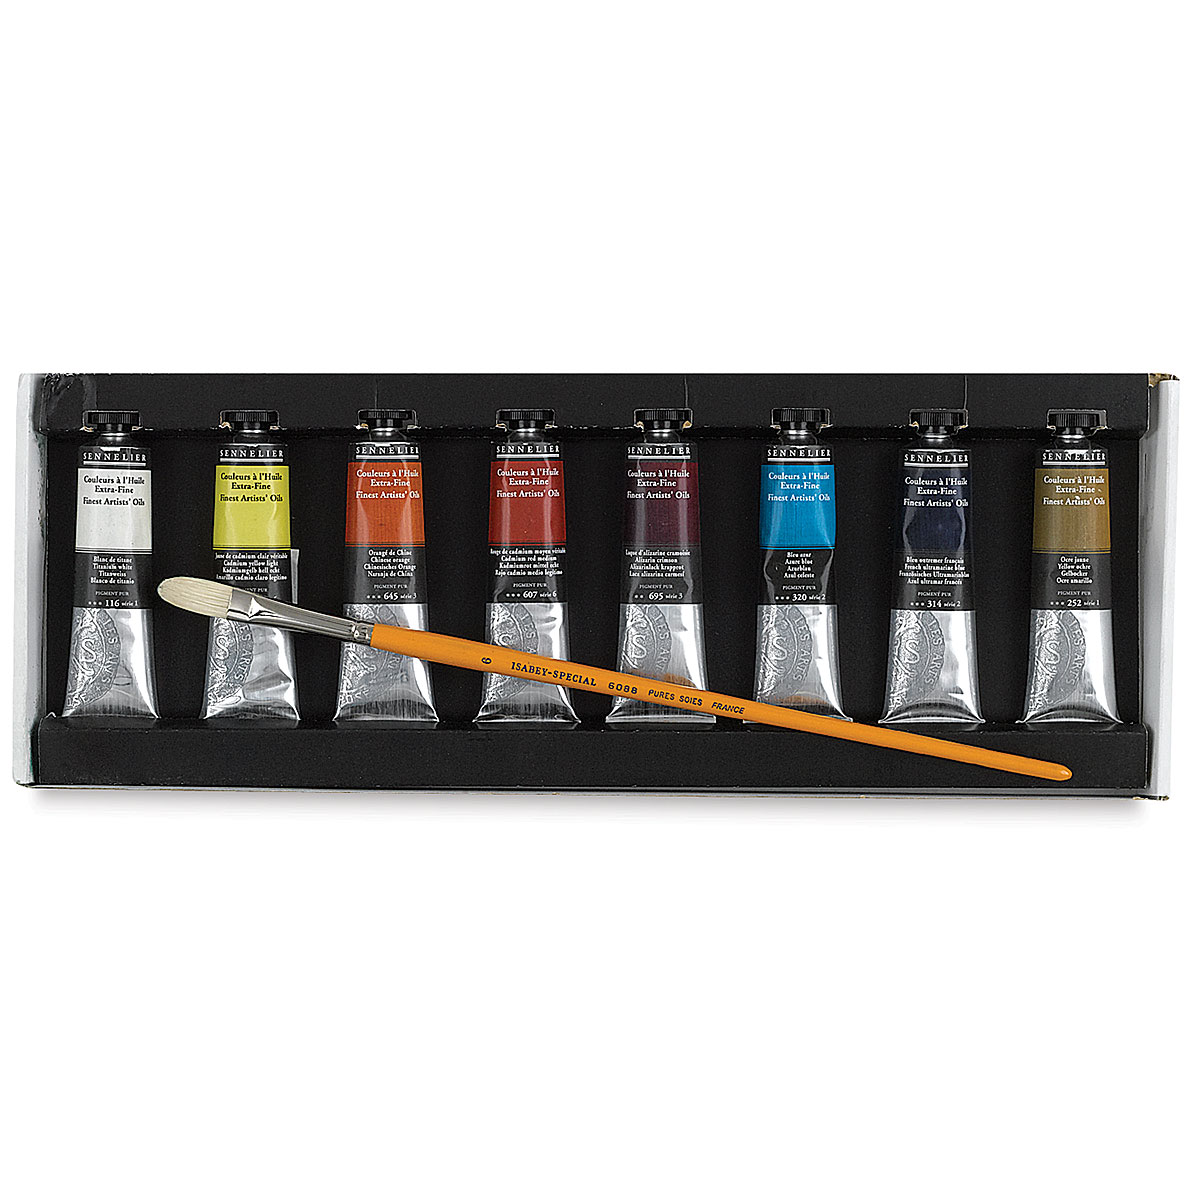 Sennelier Artists' Extra Fine Oil Paints and Sets